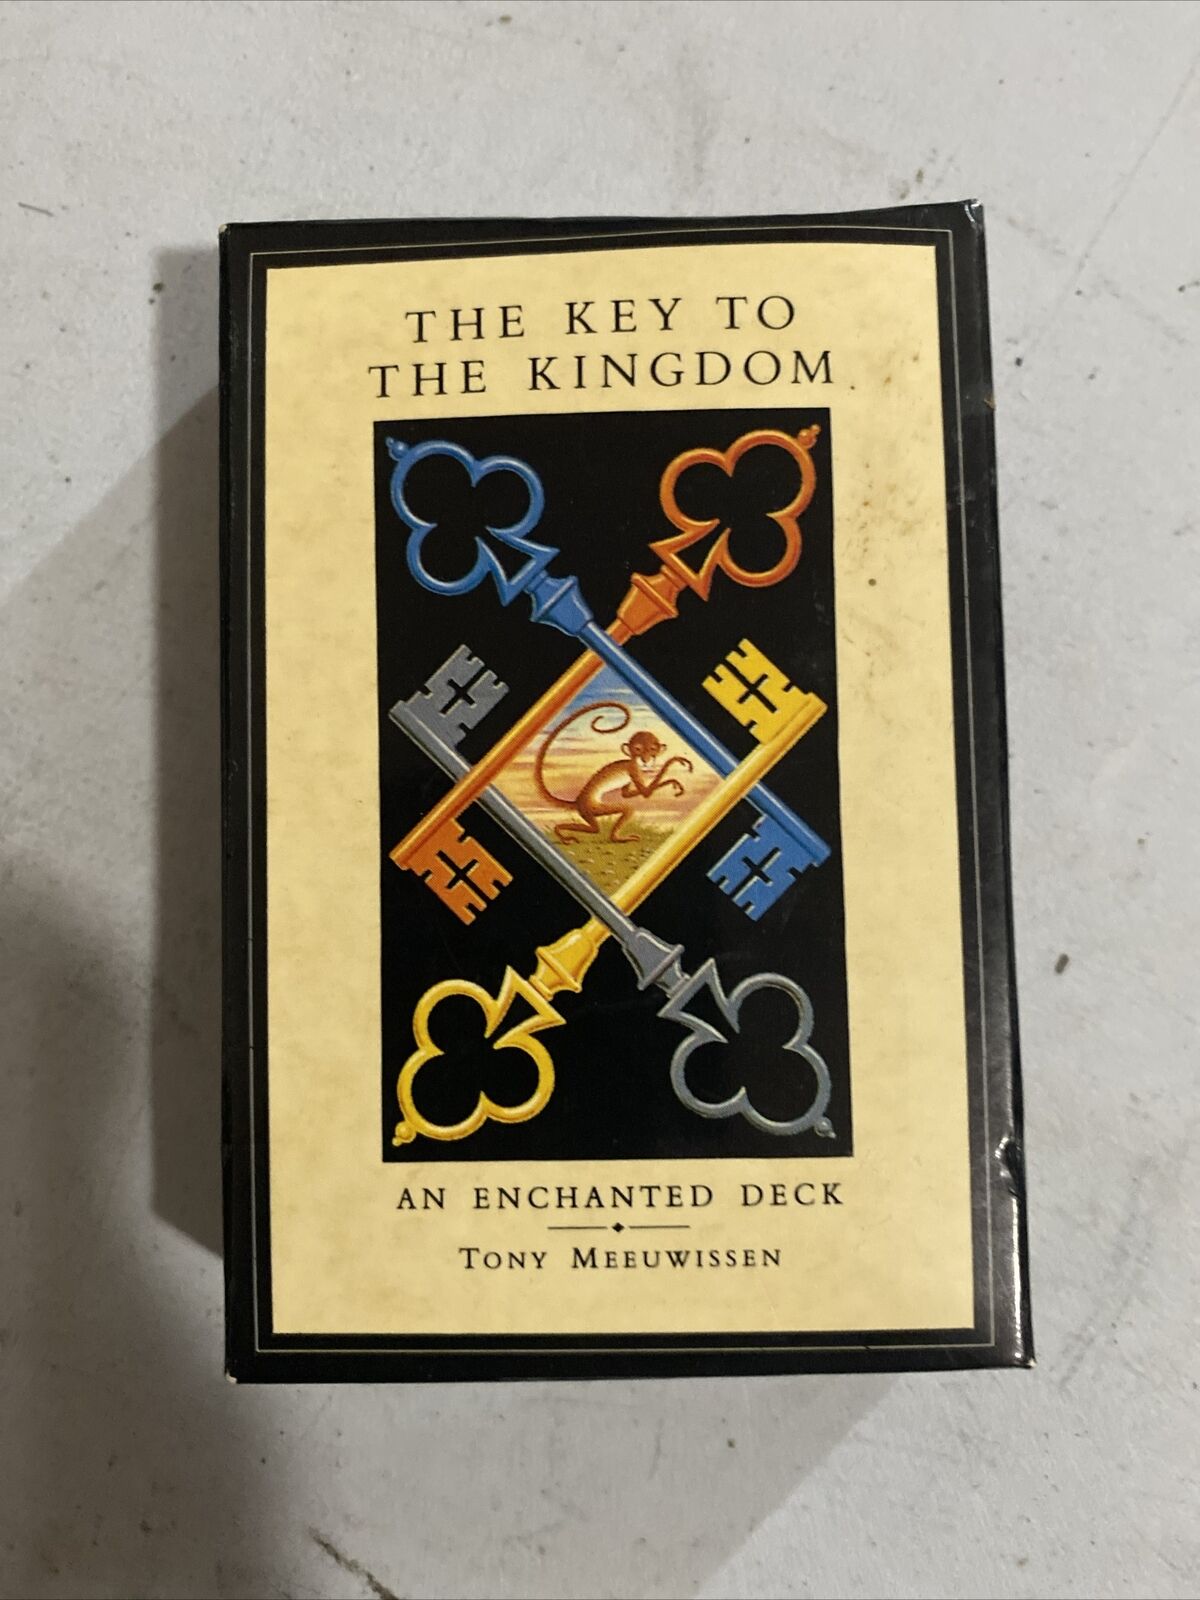 The Key To The Kingdom Playing Cards - An Enchanted Deck - Tony Meeuwissen 